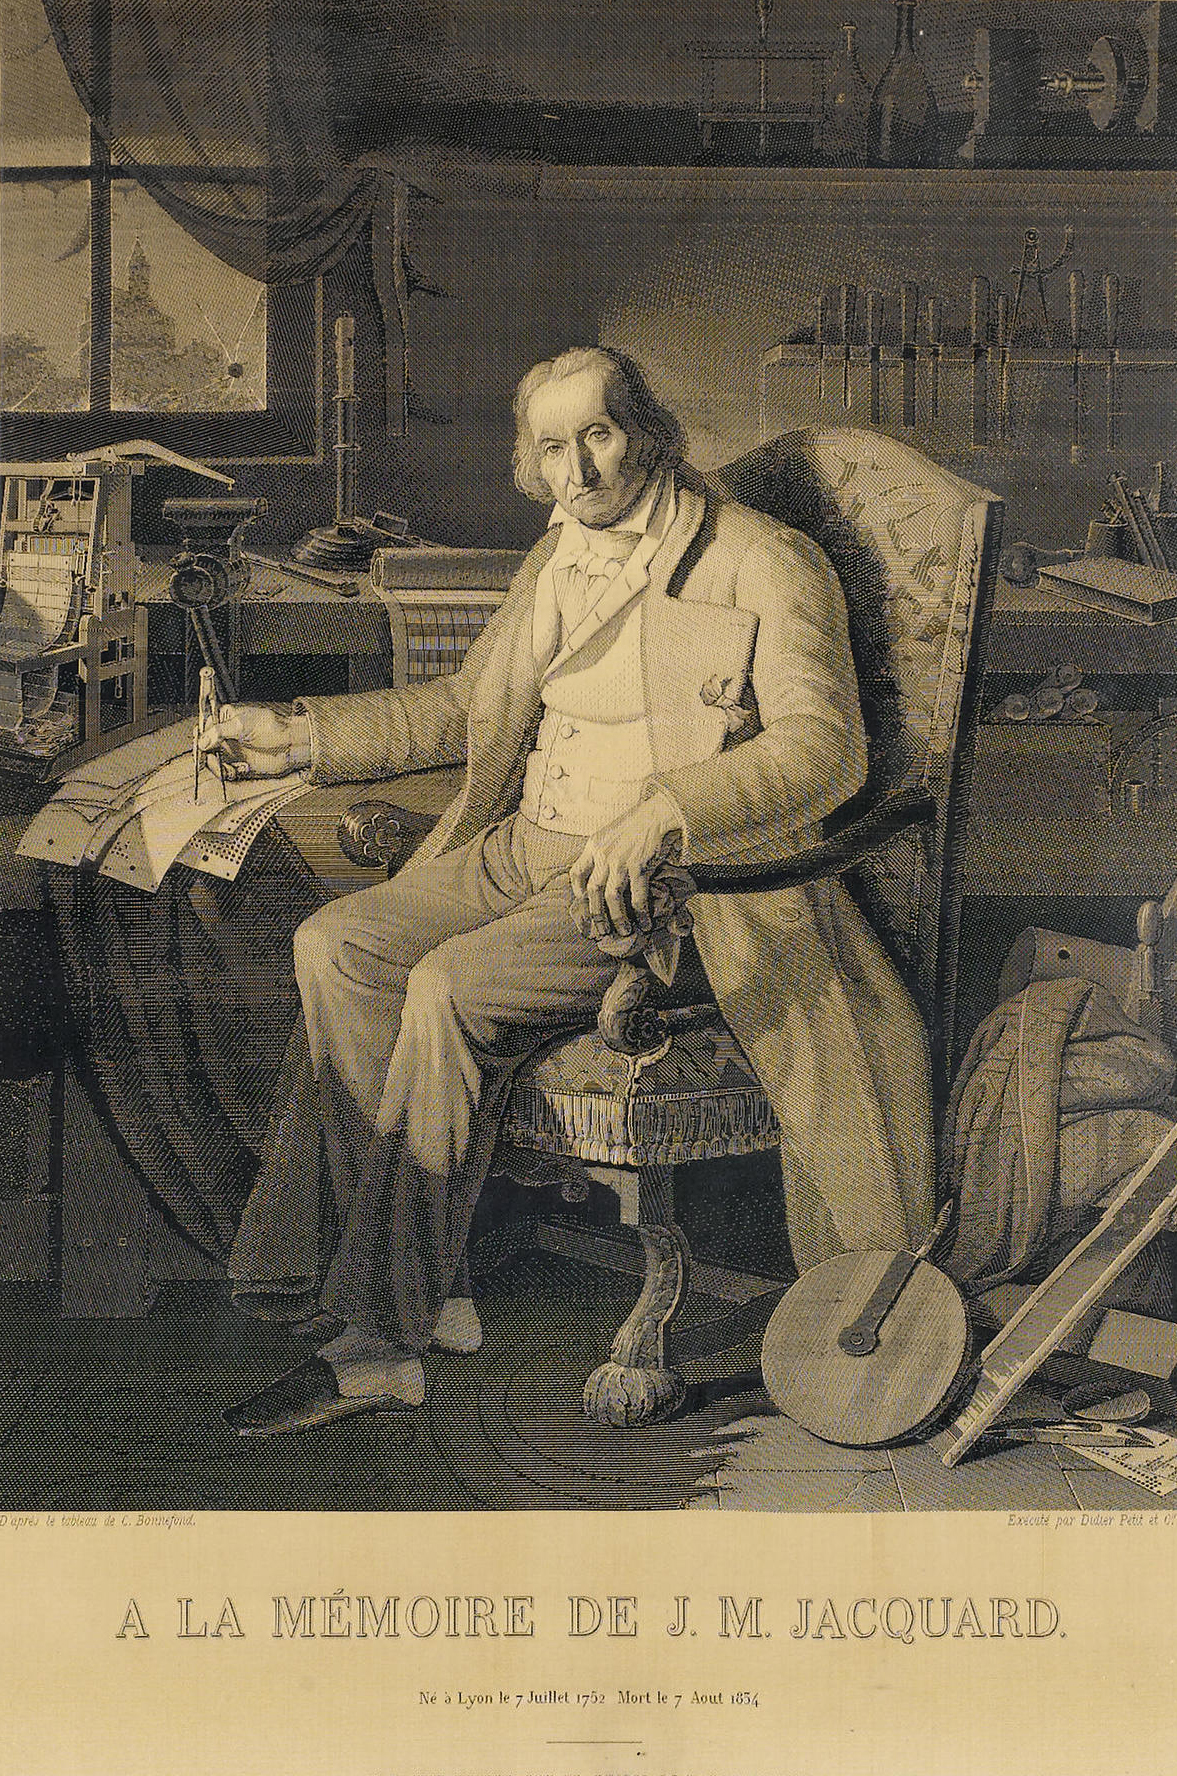 History of Jacquard: A woven portrait of the technique's inventor, J. M. Jacquard